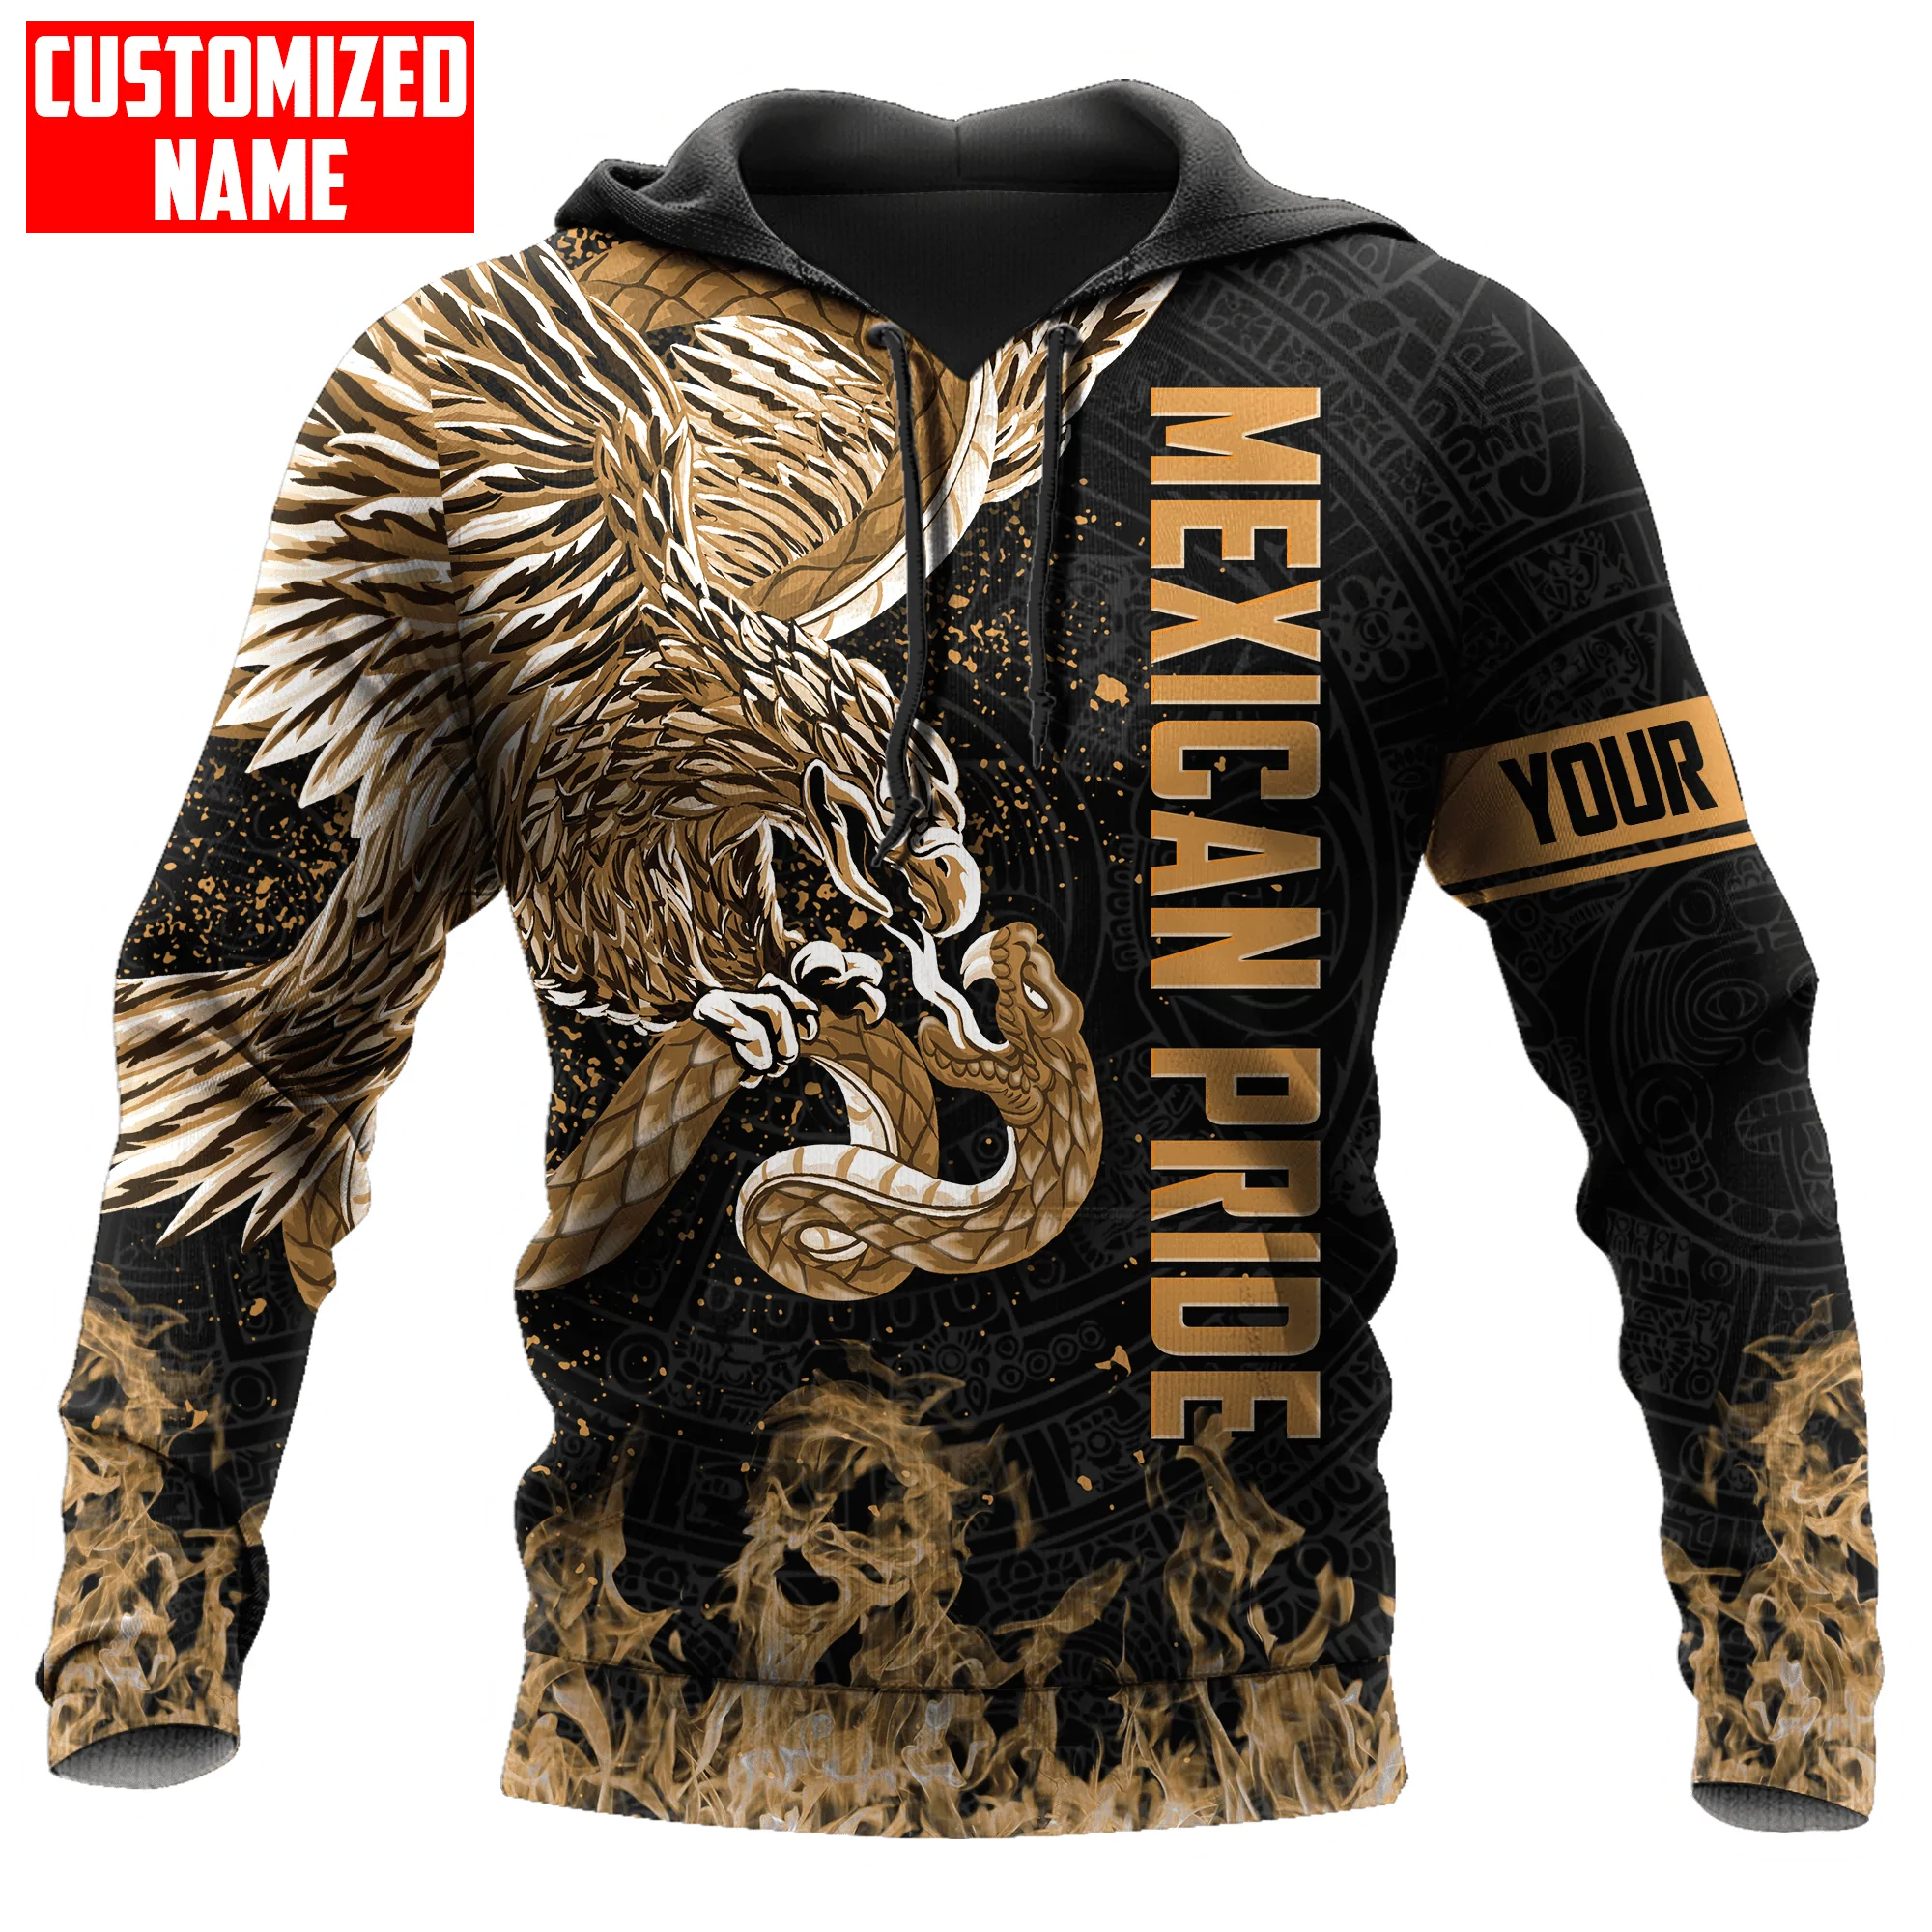 Personalized Mexico Aztec Warrior Smoke Hoodie/ Pride Mexico Hoodie/ Mexican Hoodies